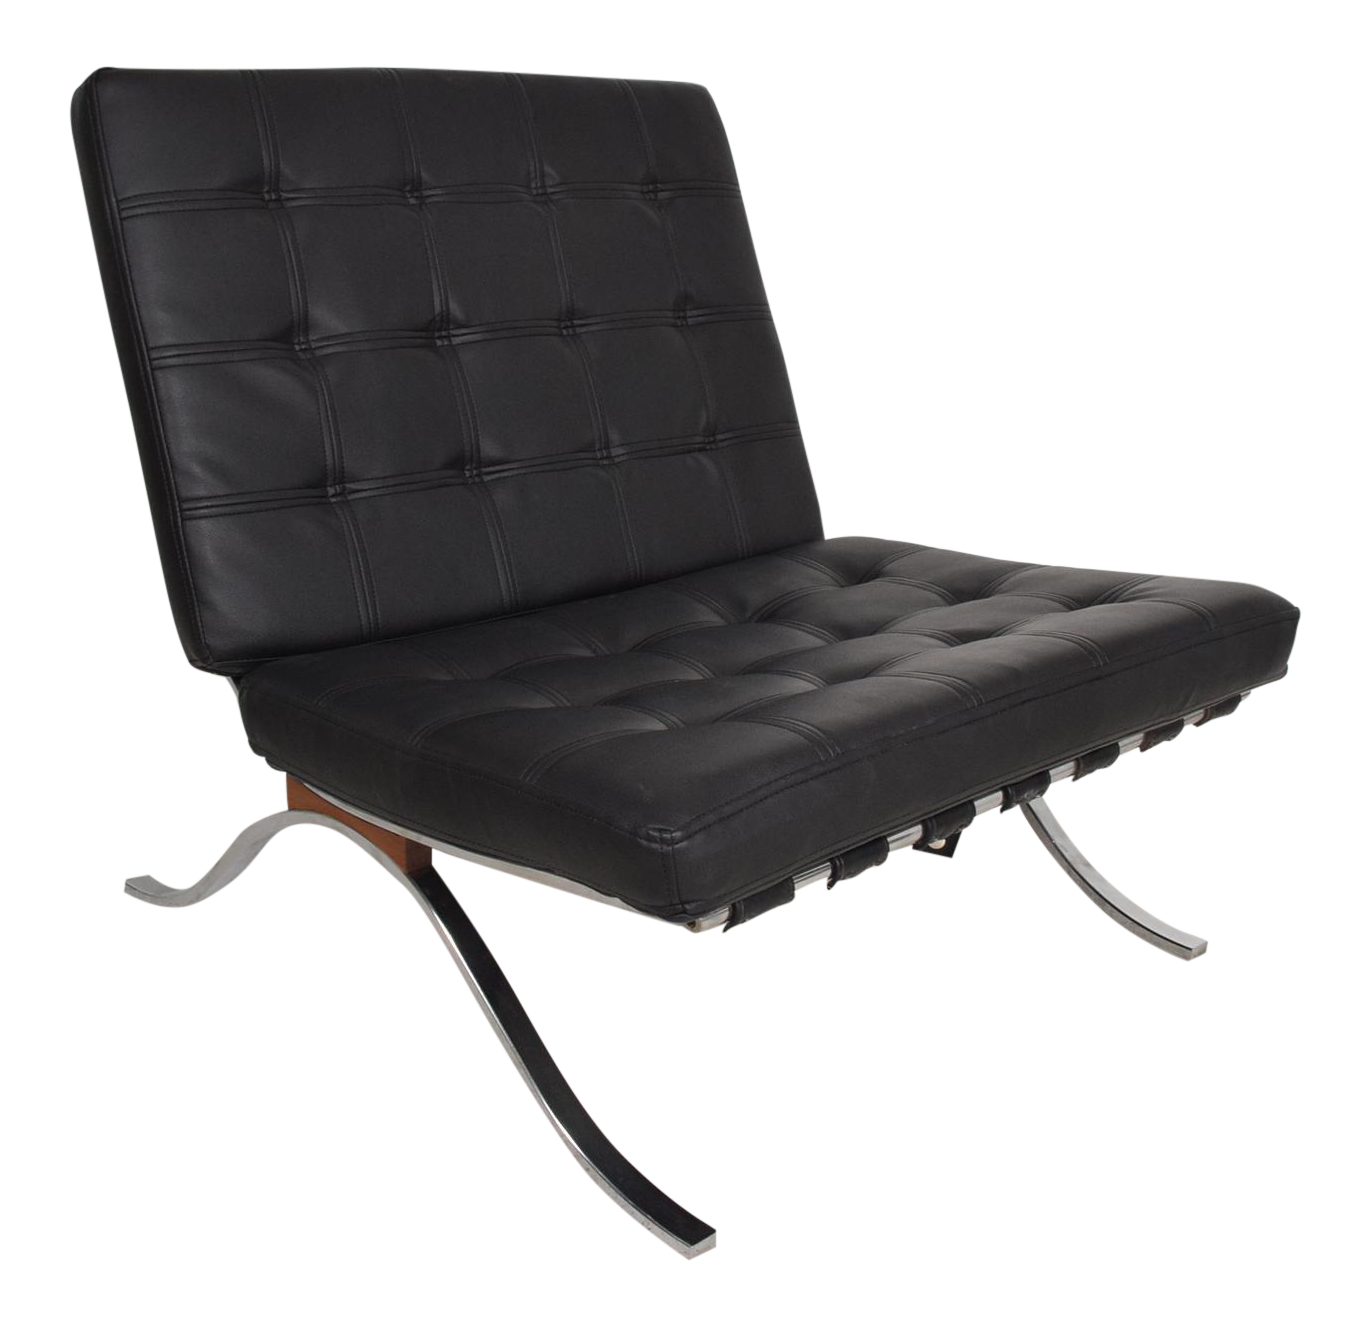 Barcelona Chair Image Free Clipart HQ PNG Image